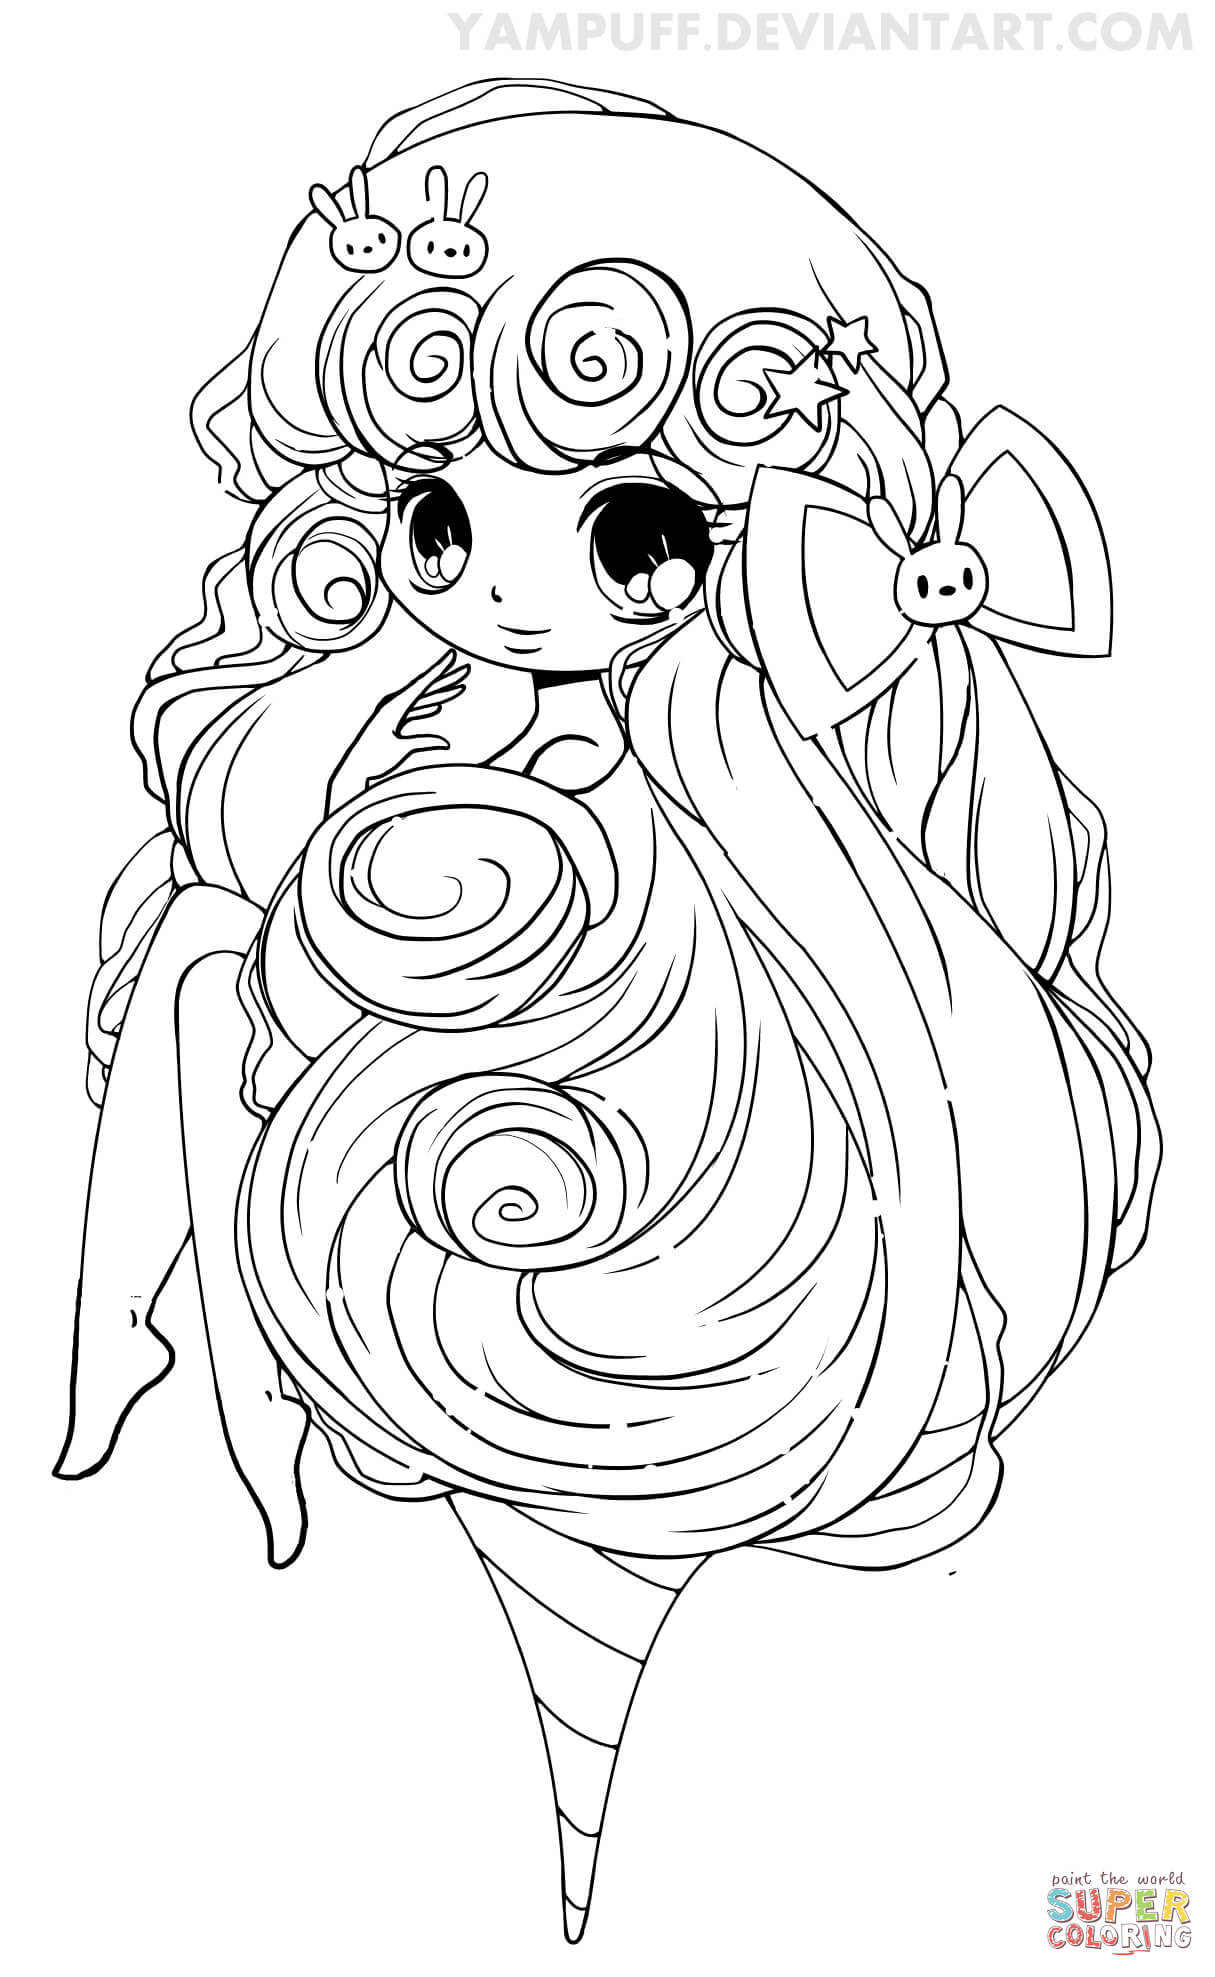 Candy Girl Coloring Pages
 Chibi Cotton Candy Girl coloring page